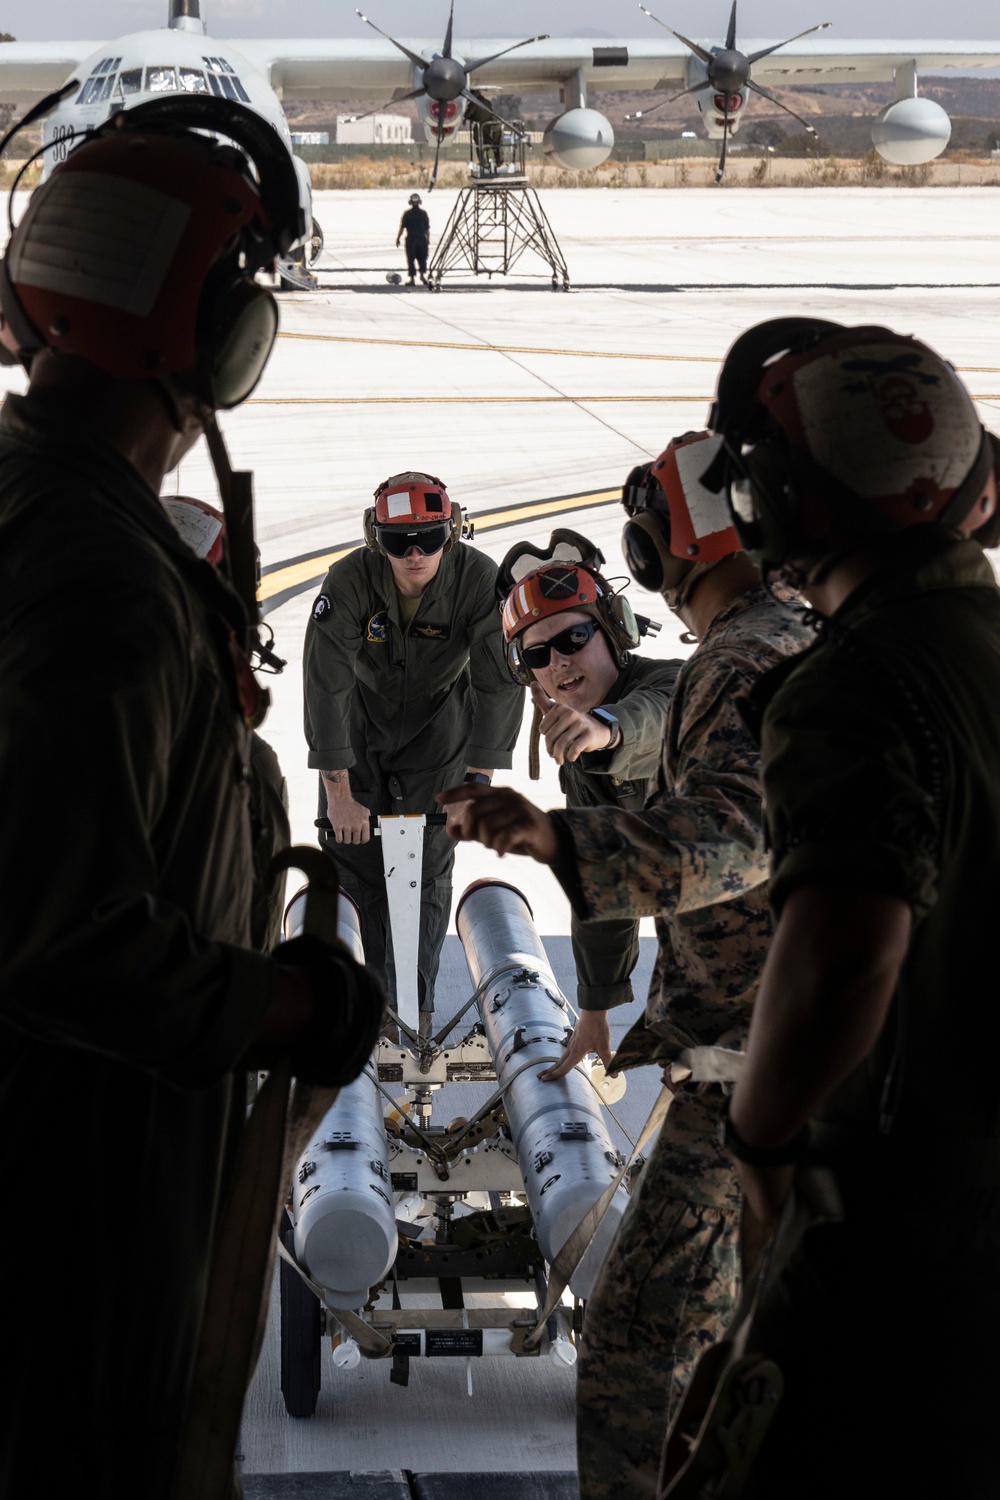 U.S. Air Force, Marines conduct joint training